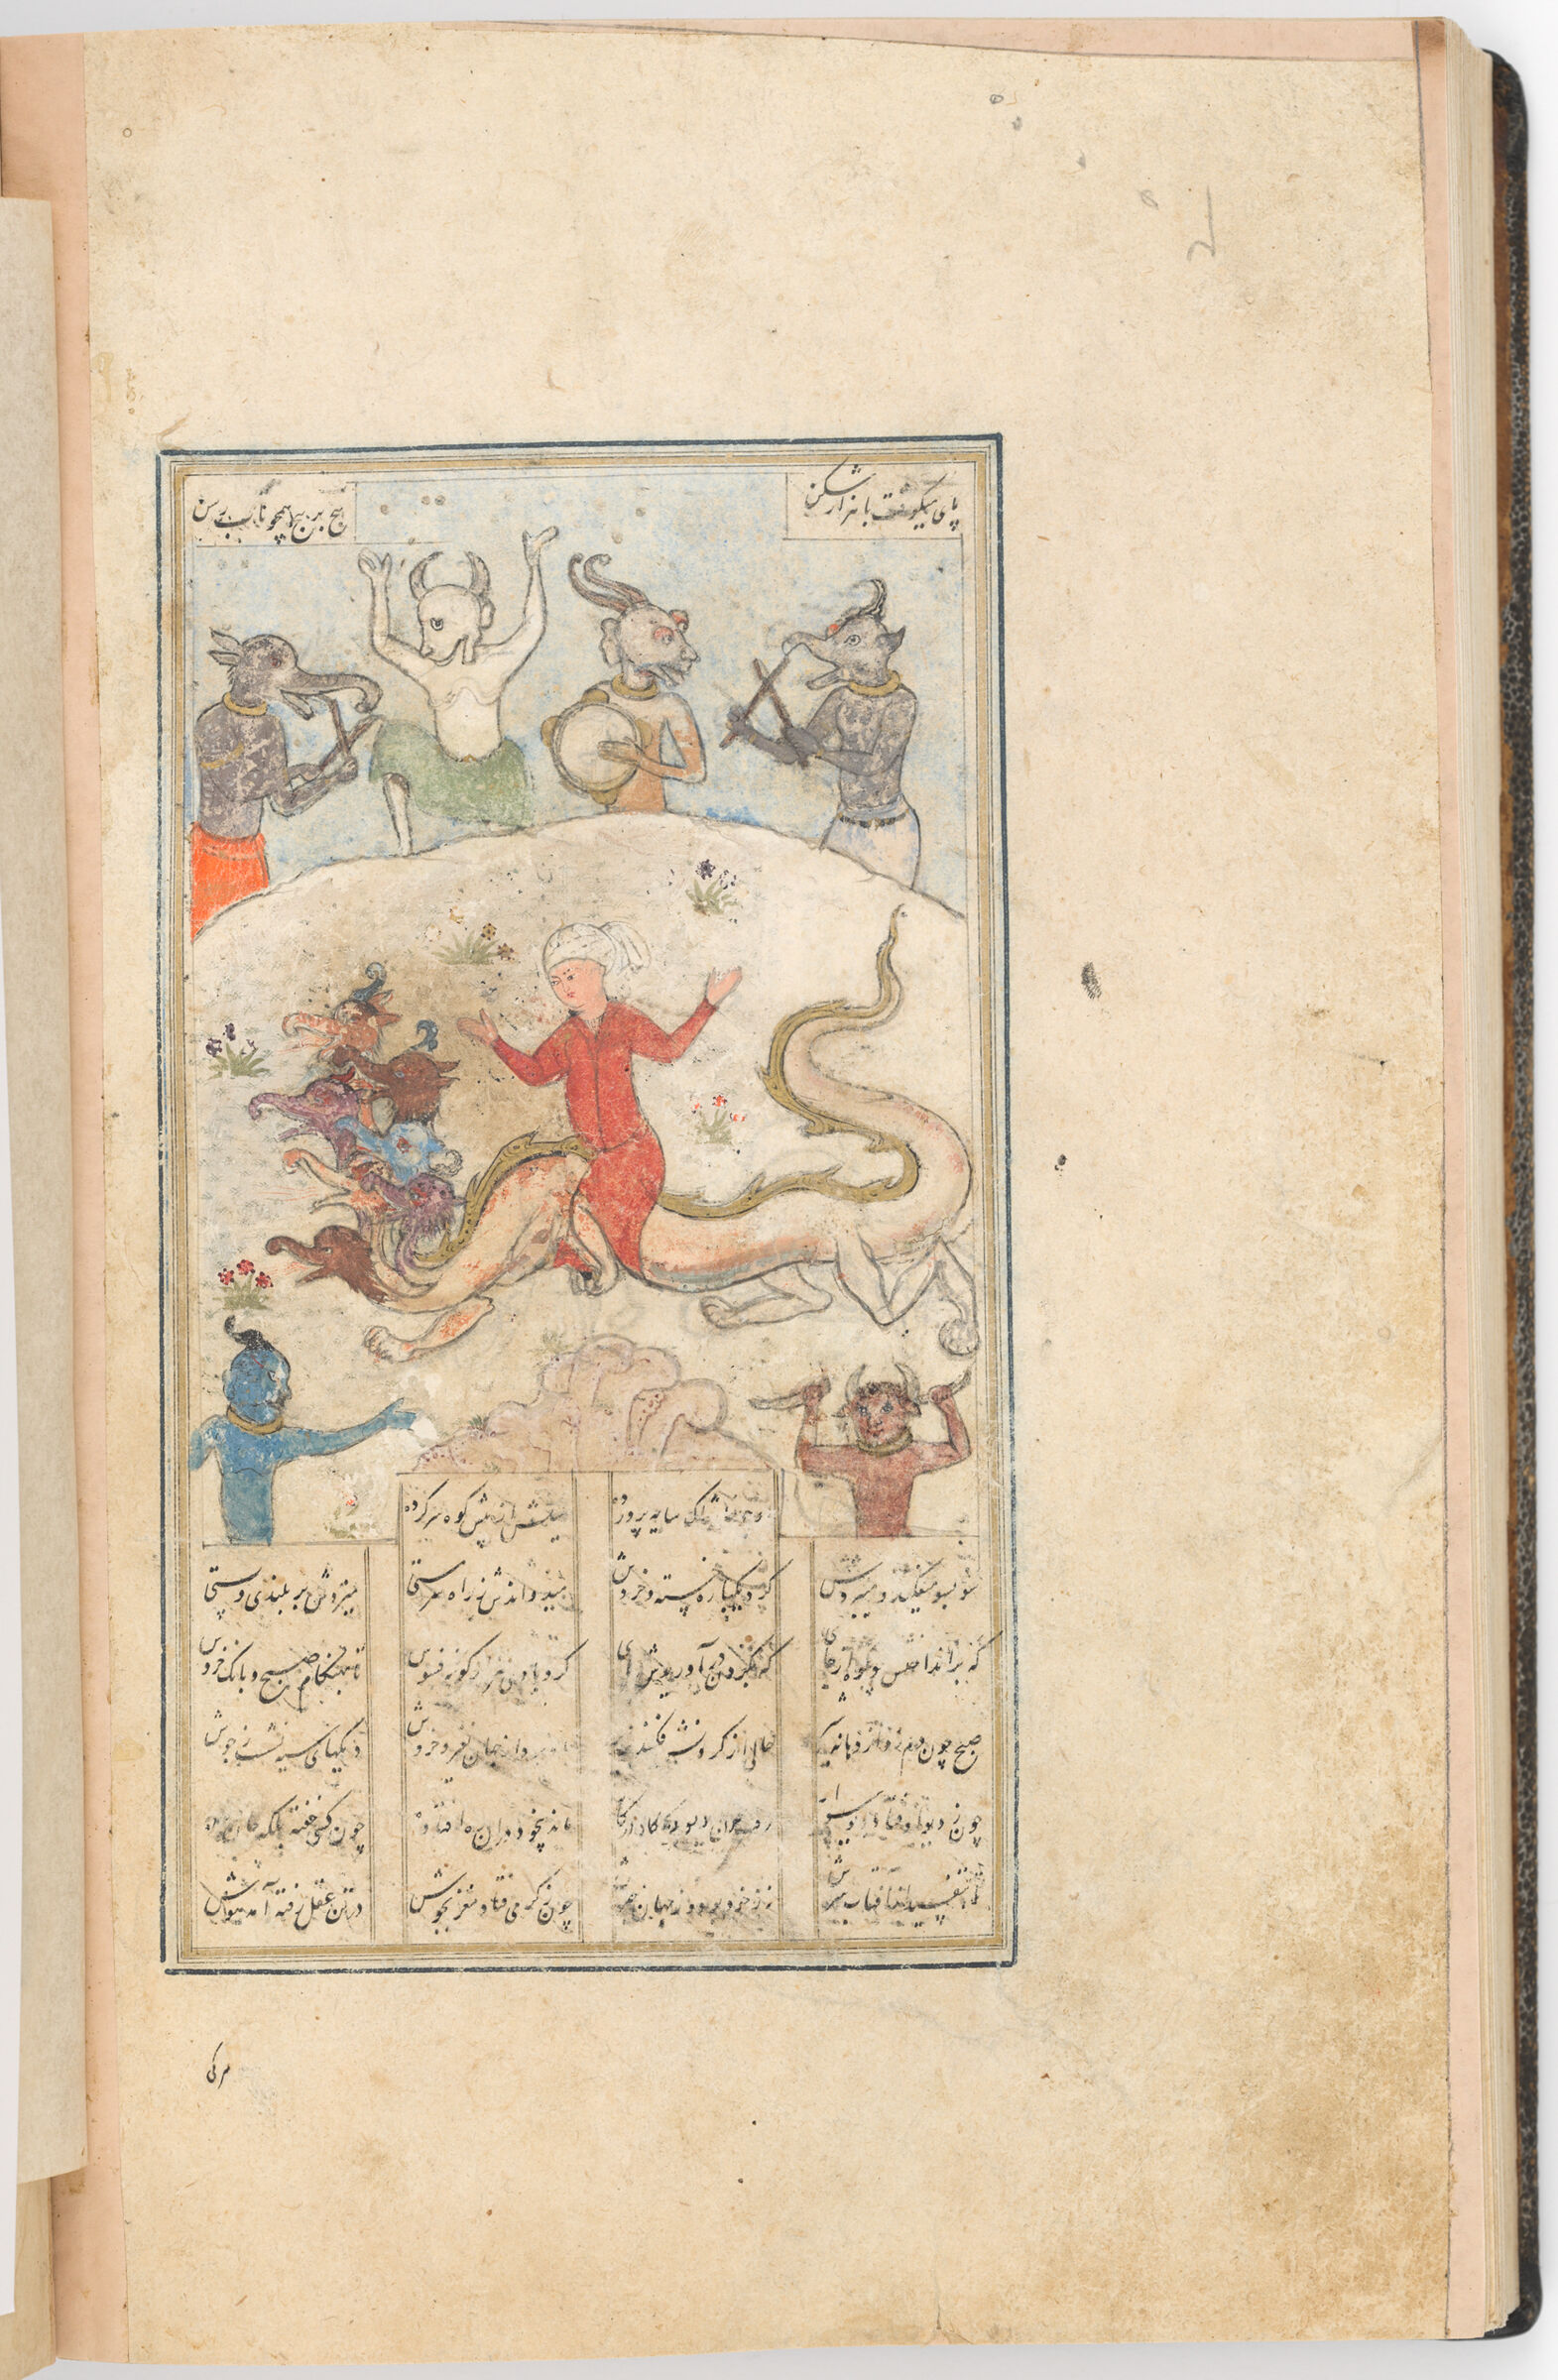 Mahan Confronted By Demons Finds His Horse Transformed Into A Seven-Headed Dragon (Text Recto; Painting Verso Of Folio 224), Painting From A Manuscript Of The Khamsa By Nizami